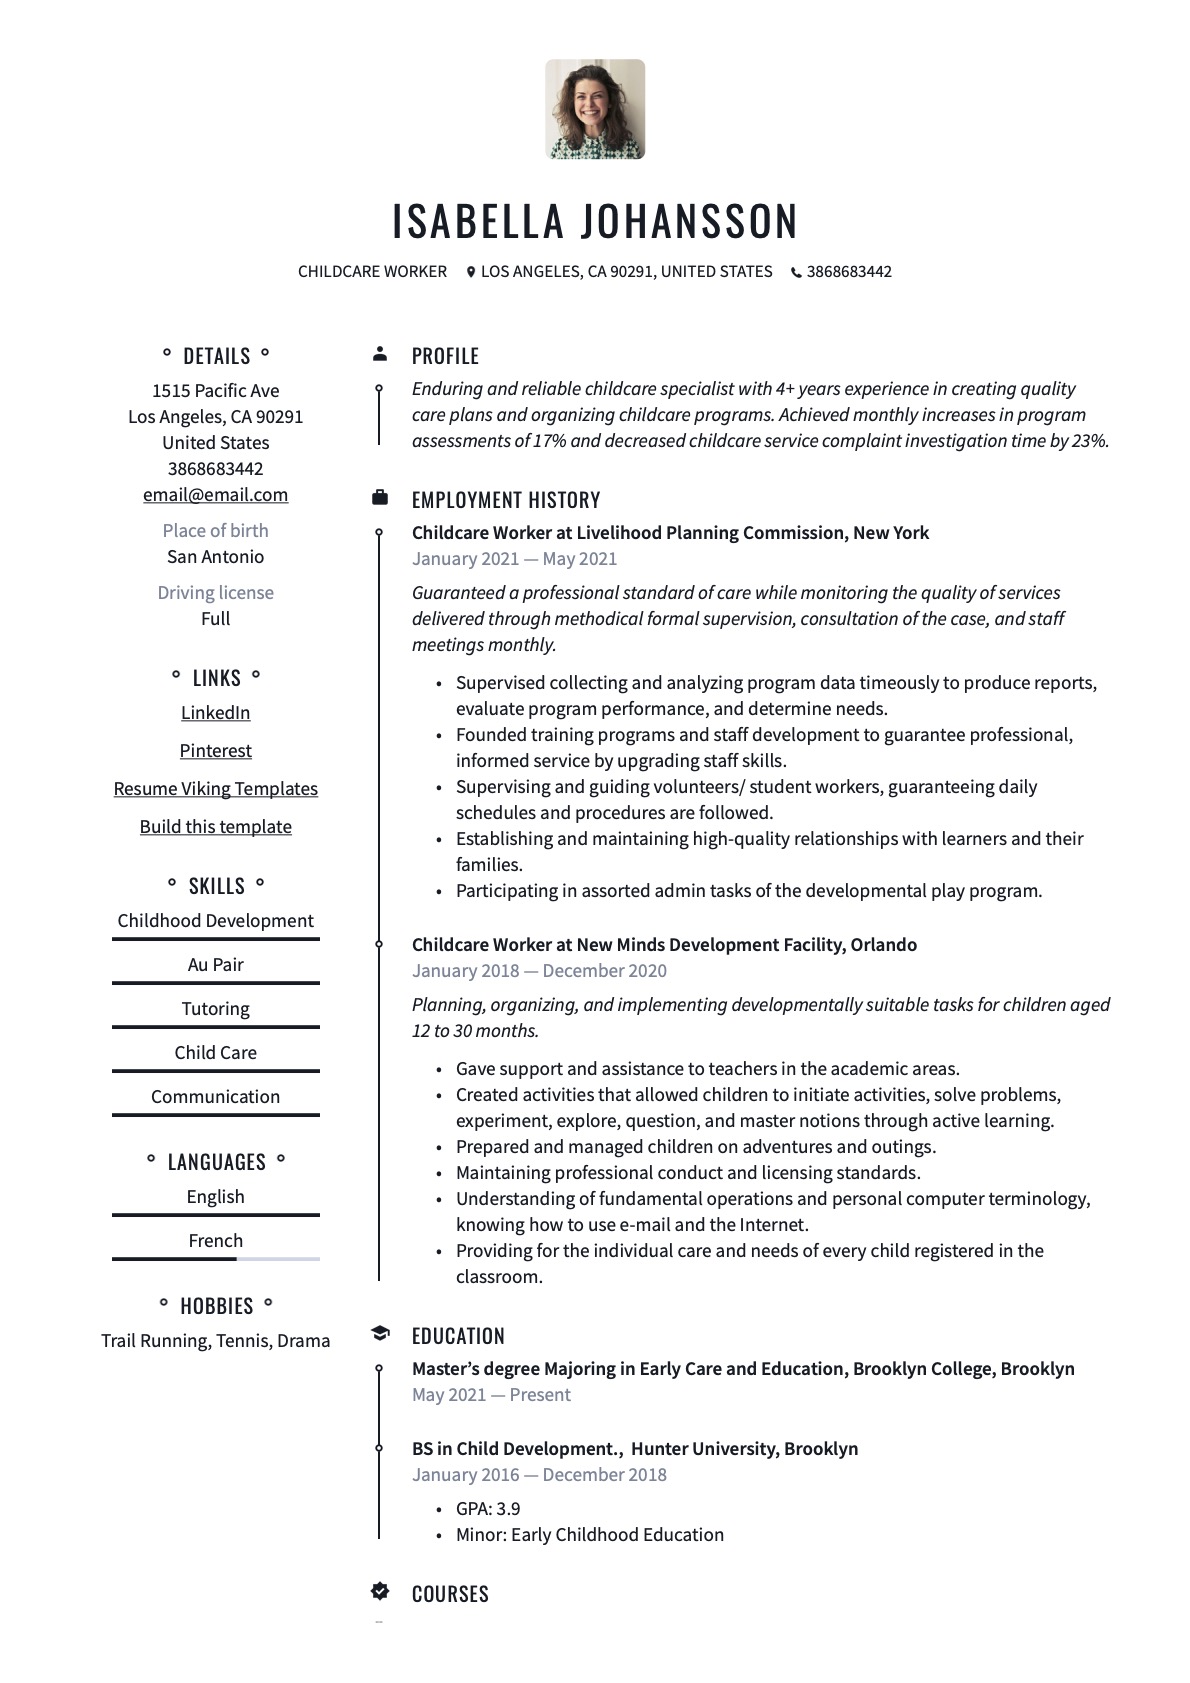 Professional Child Care Worker Resume Example